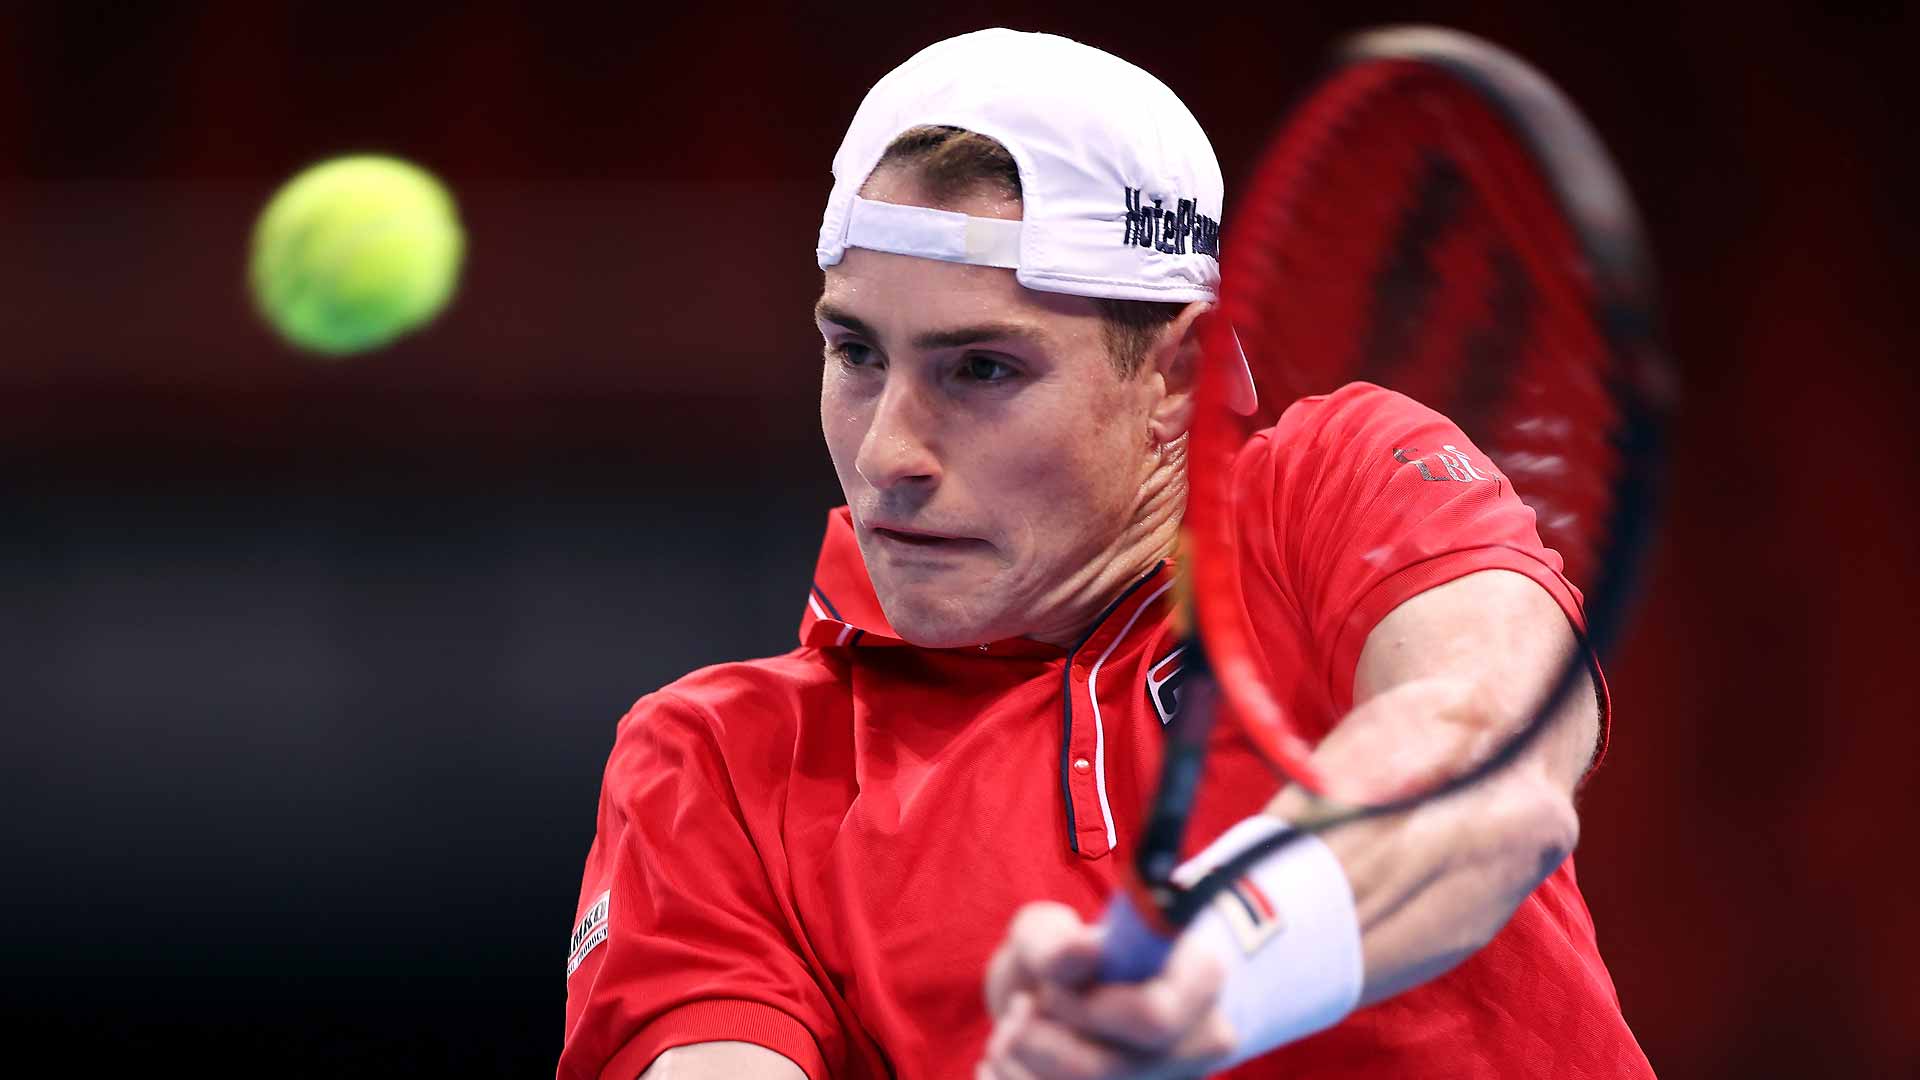 Isner's 'Surprise' Leads To Quick Start For United States Against Canada